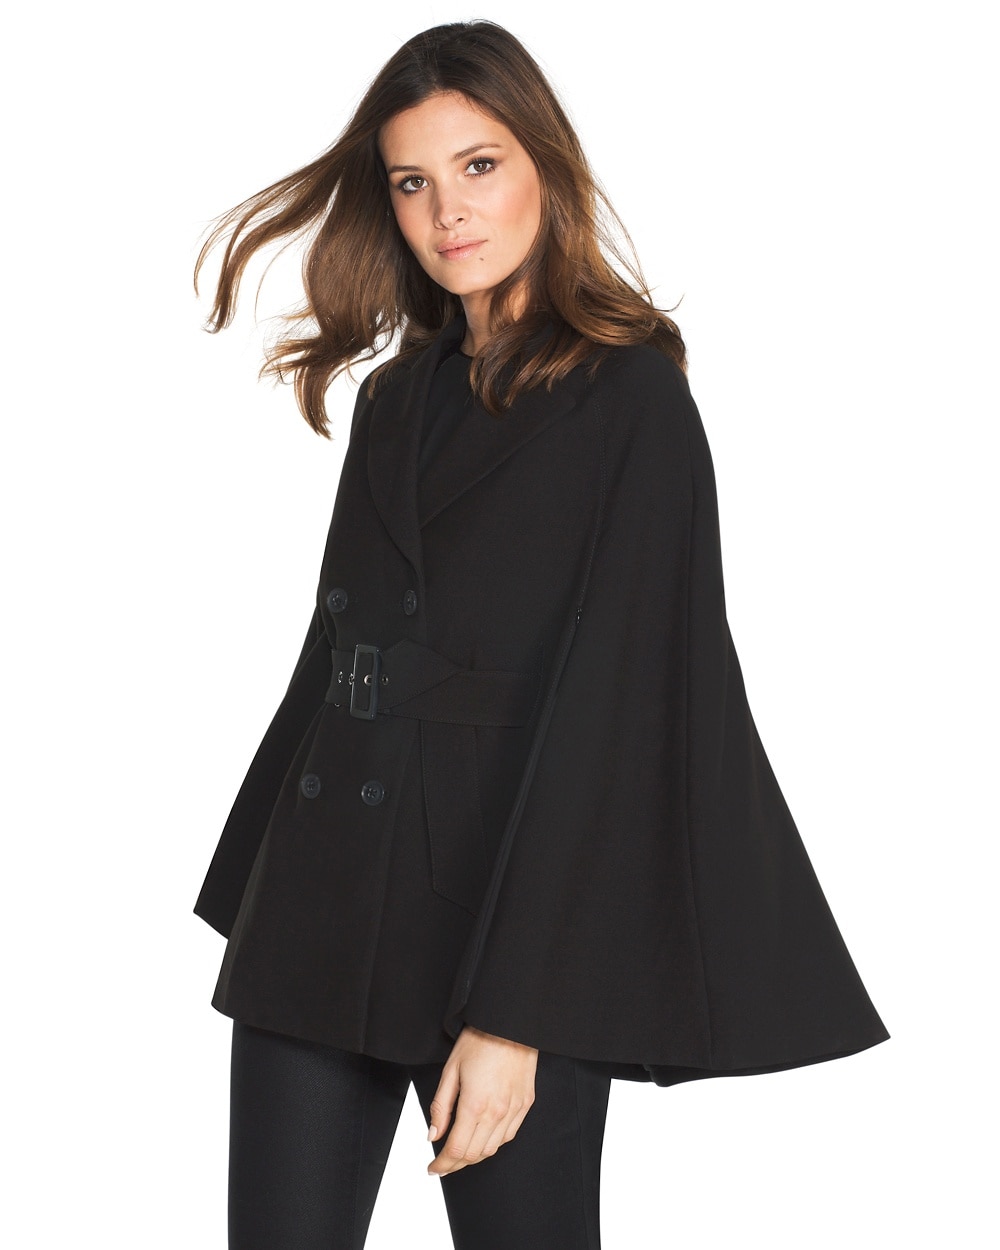 Double-Breasted Cape - Shop Women's Work Attire & Professional Clothing ...